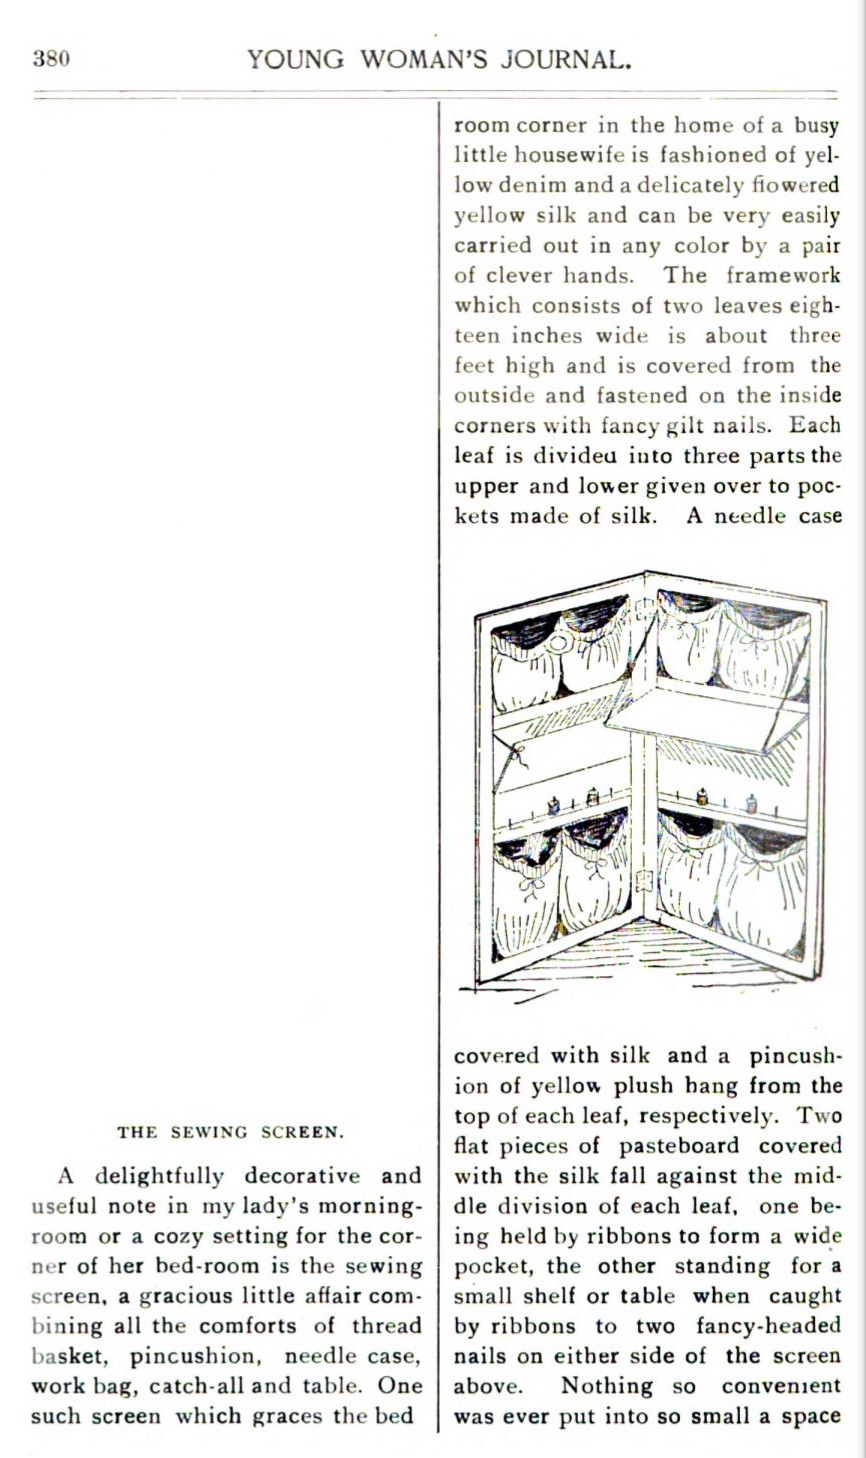 sewing-screen-1896-young-momans-journal-1 (1).jpg